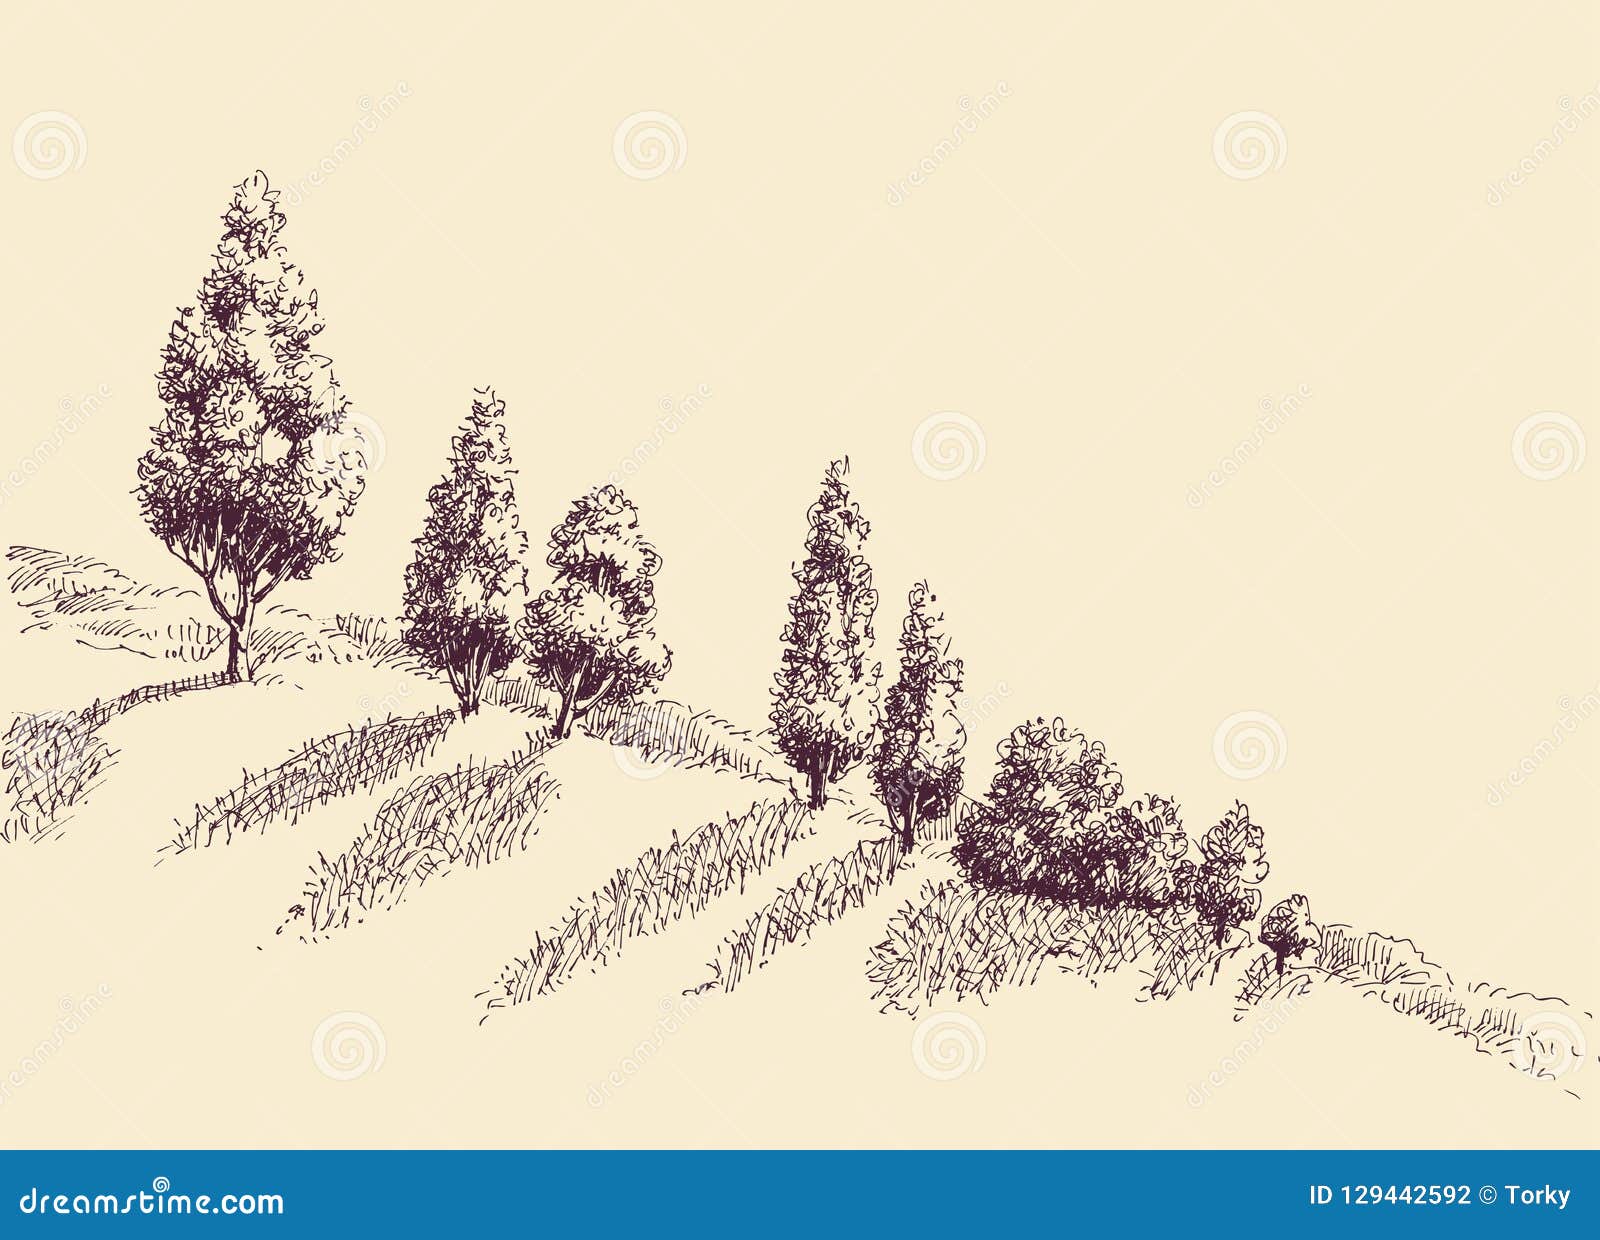 trees growing on a hill slope sketch